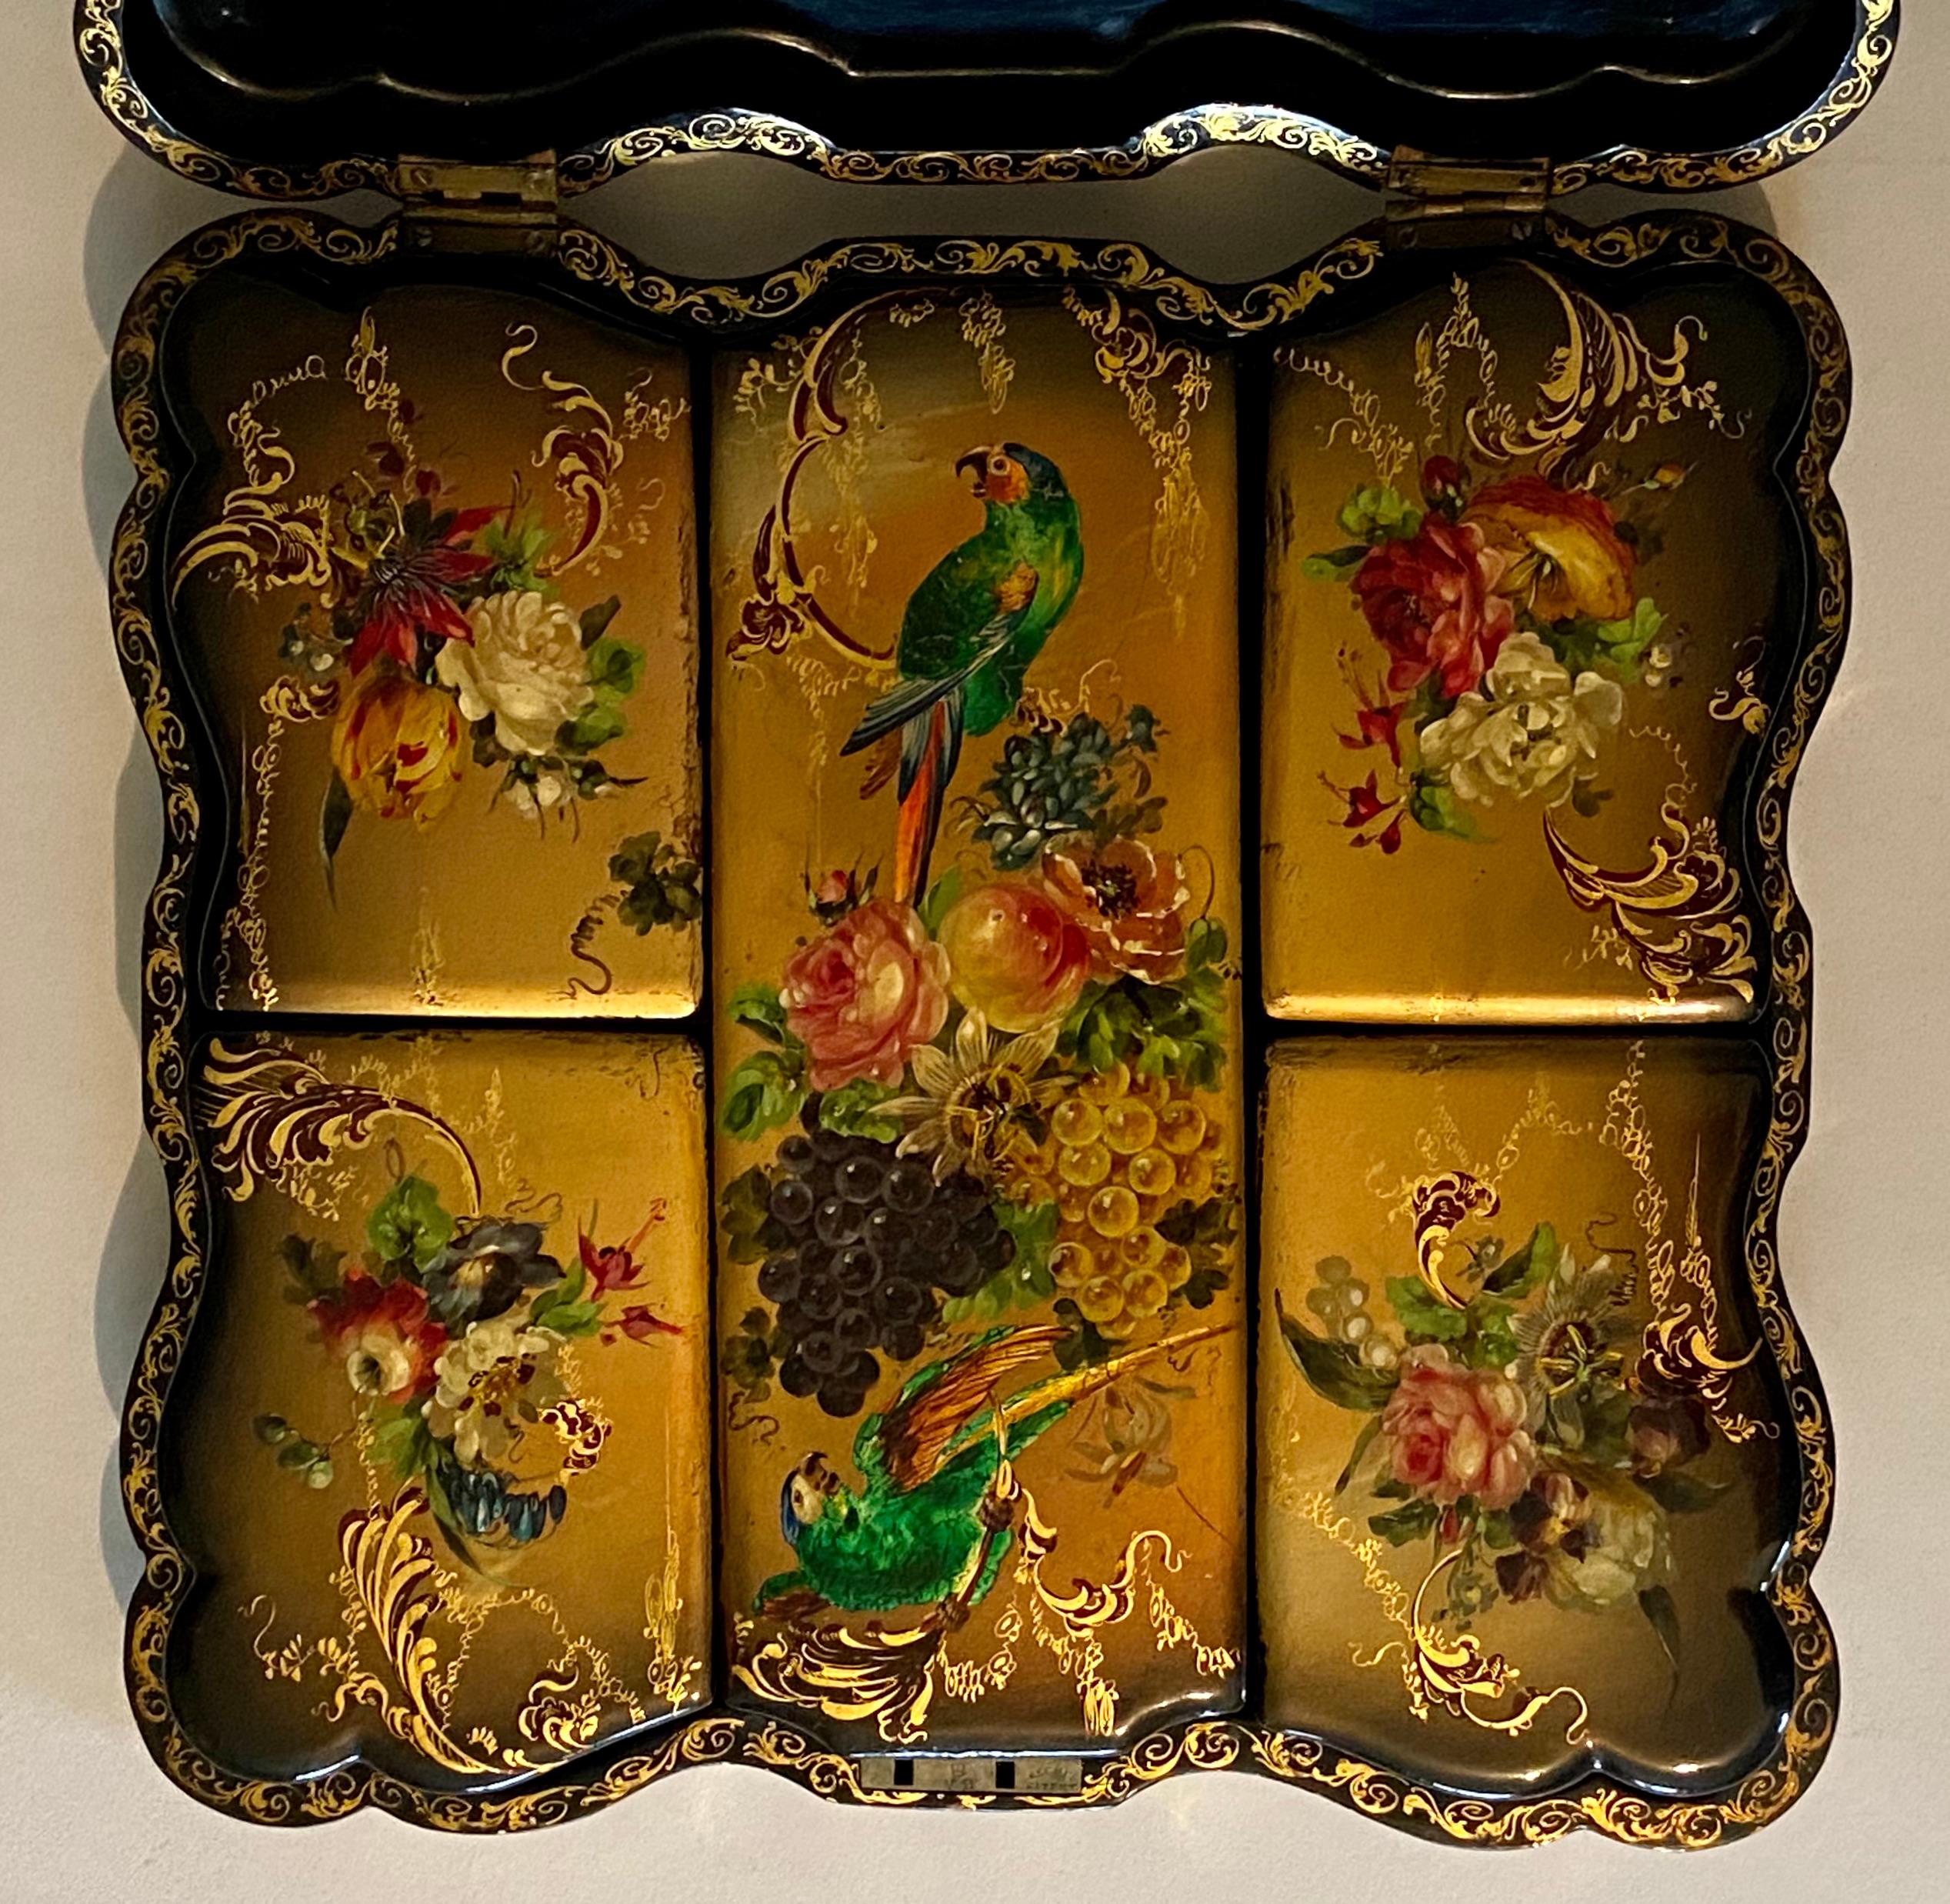 Victorian painted papier mache box enclosing five further painted boxes, decorated with parrots, fruits, foliage and gilded scrolls